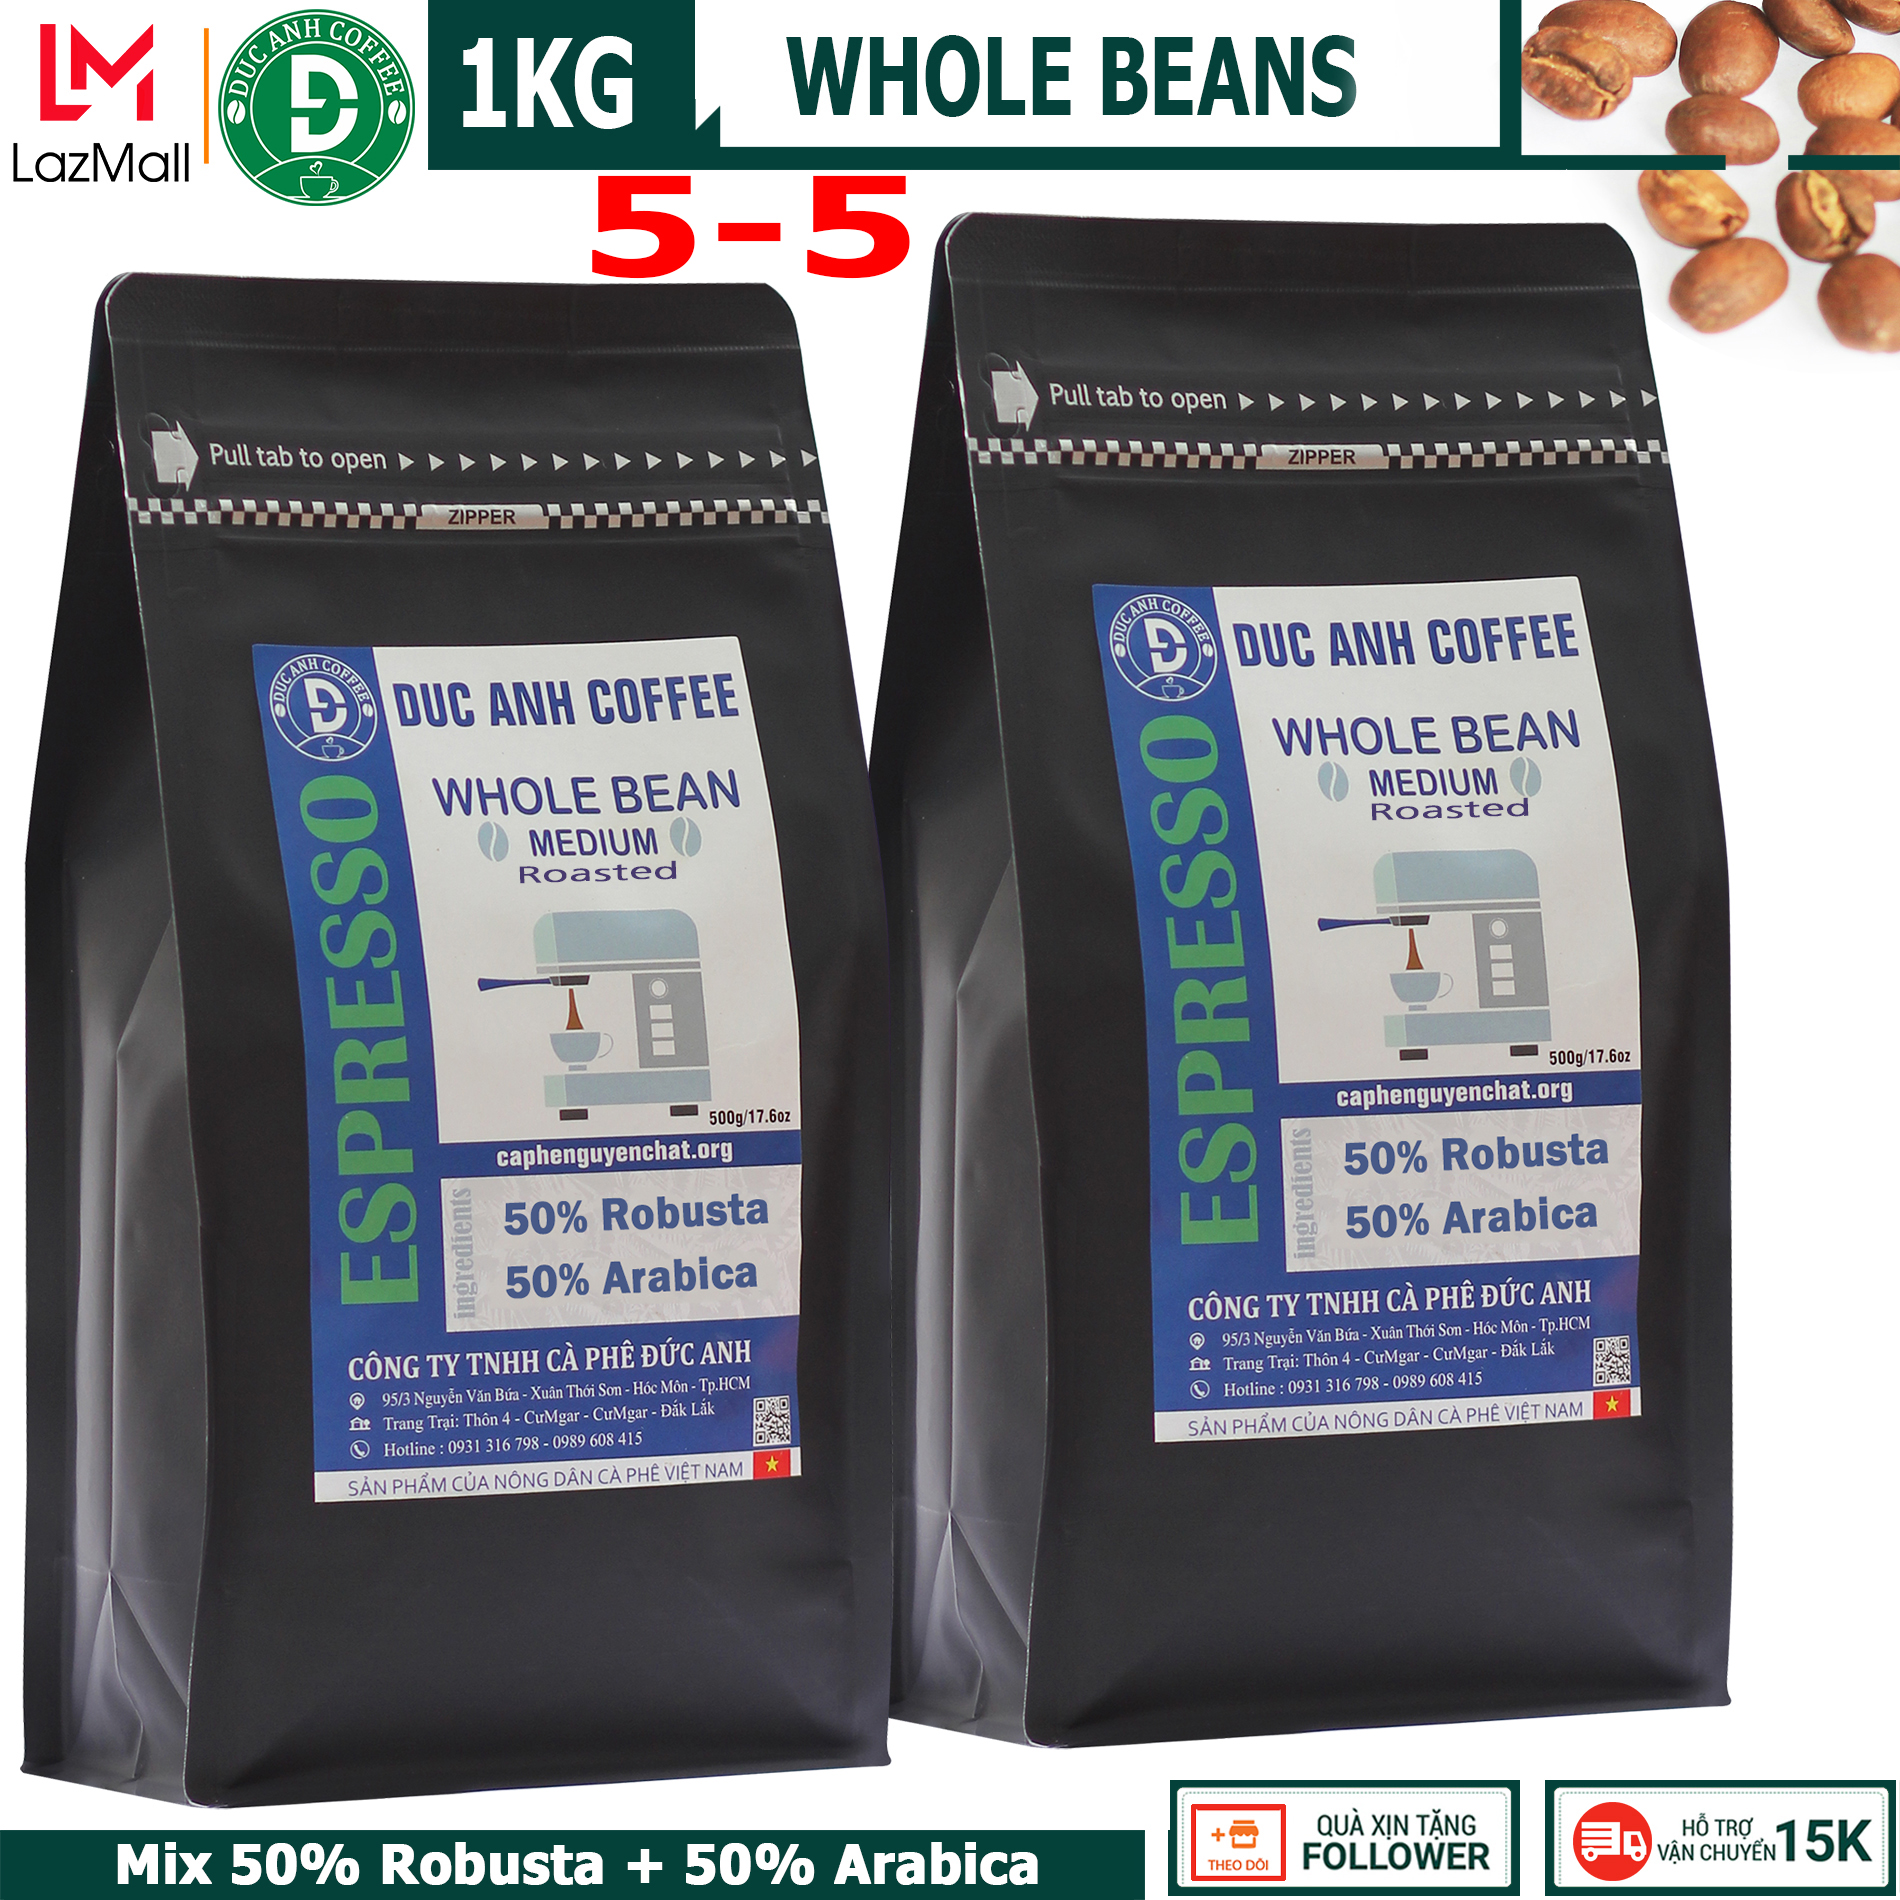 1kg Special whole beans coffee for Espresso machines with the rate Mix of